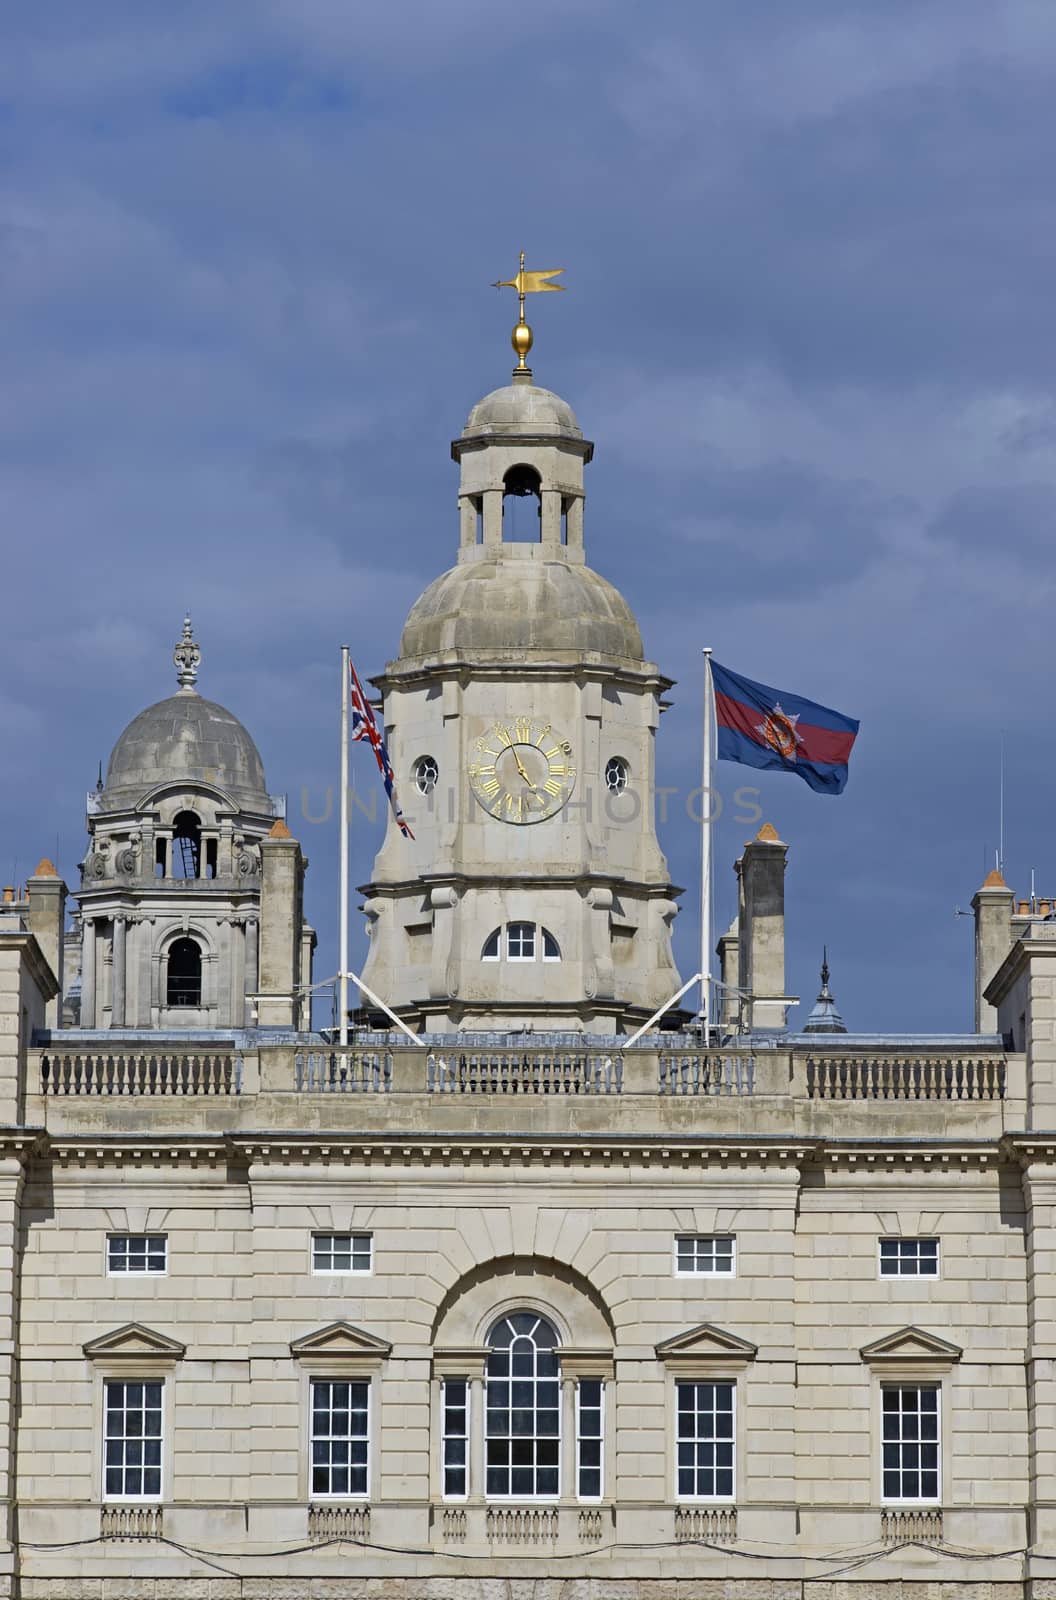 Horse Guards. A historic building at Horse Guards Parade in London, England